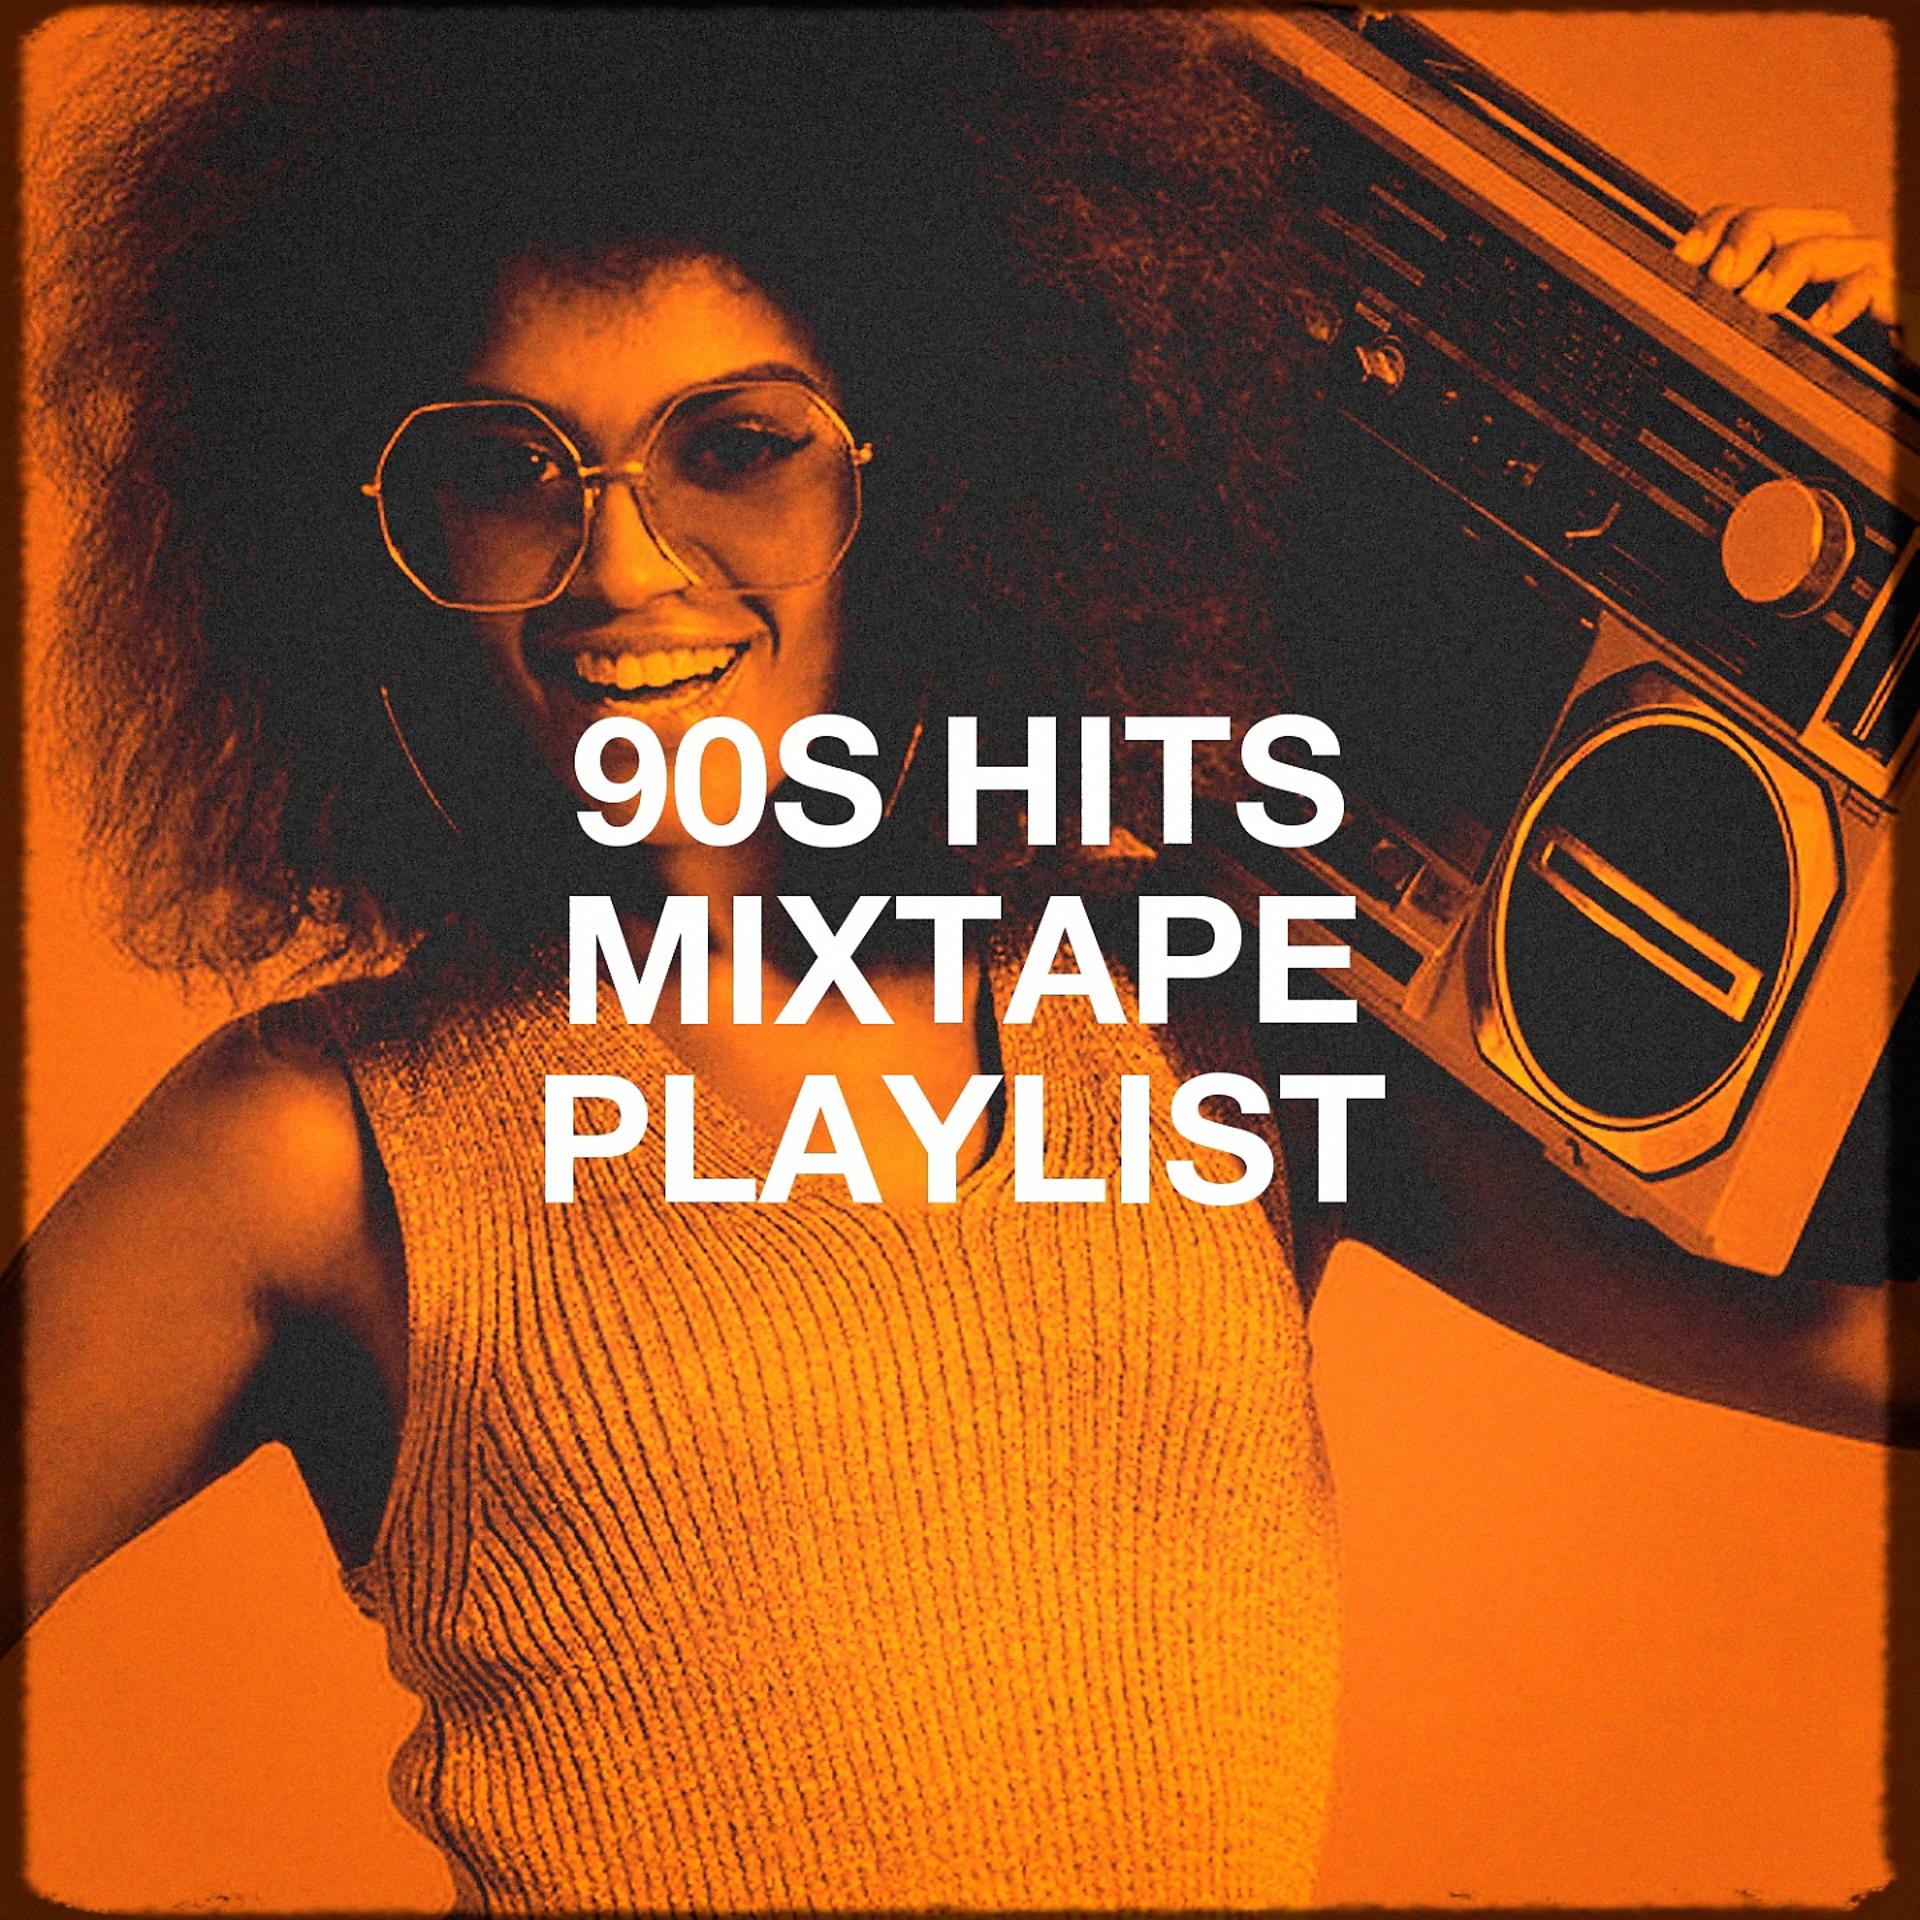 90 covers. RNB Hits. The Funky Groove connection. Greatest '90s Songs. Mixtape Hits.